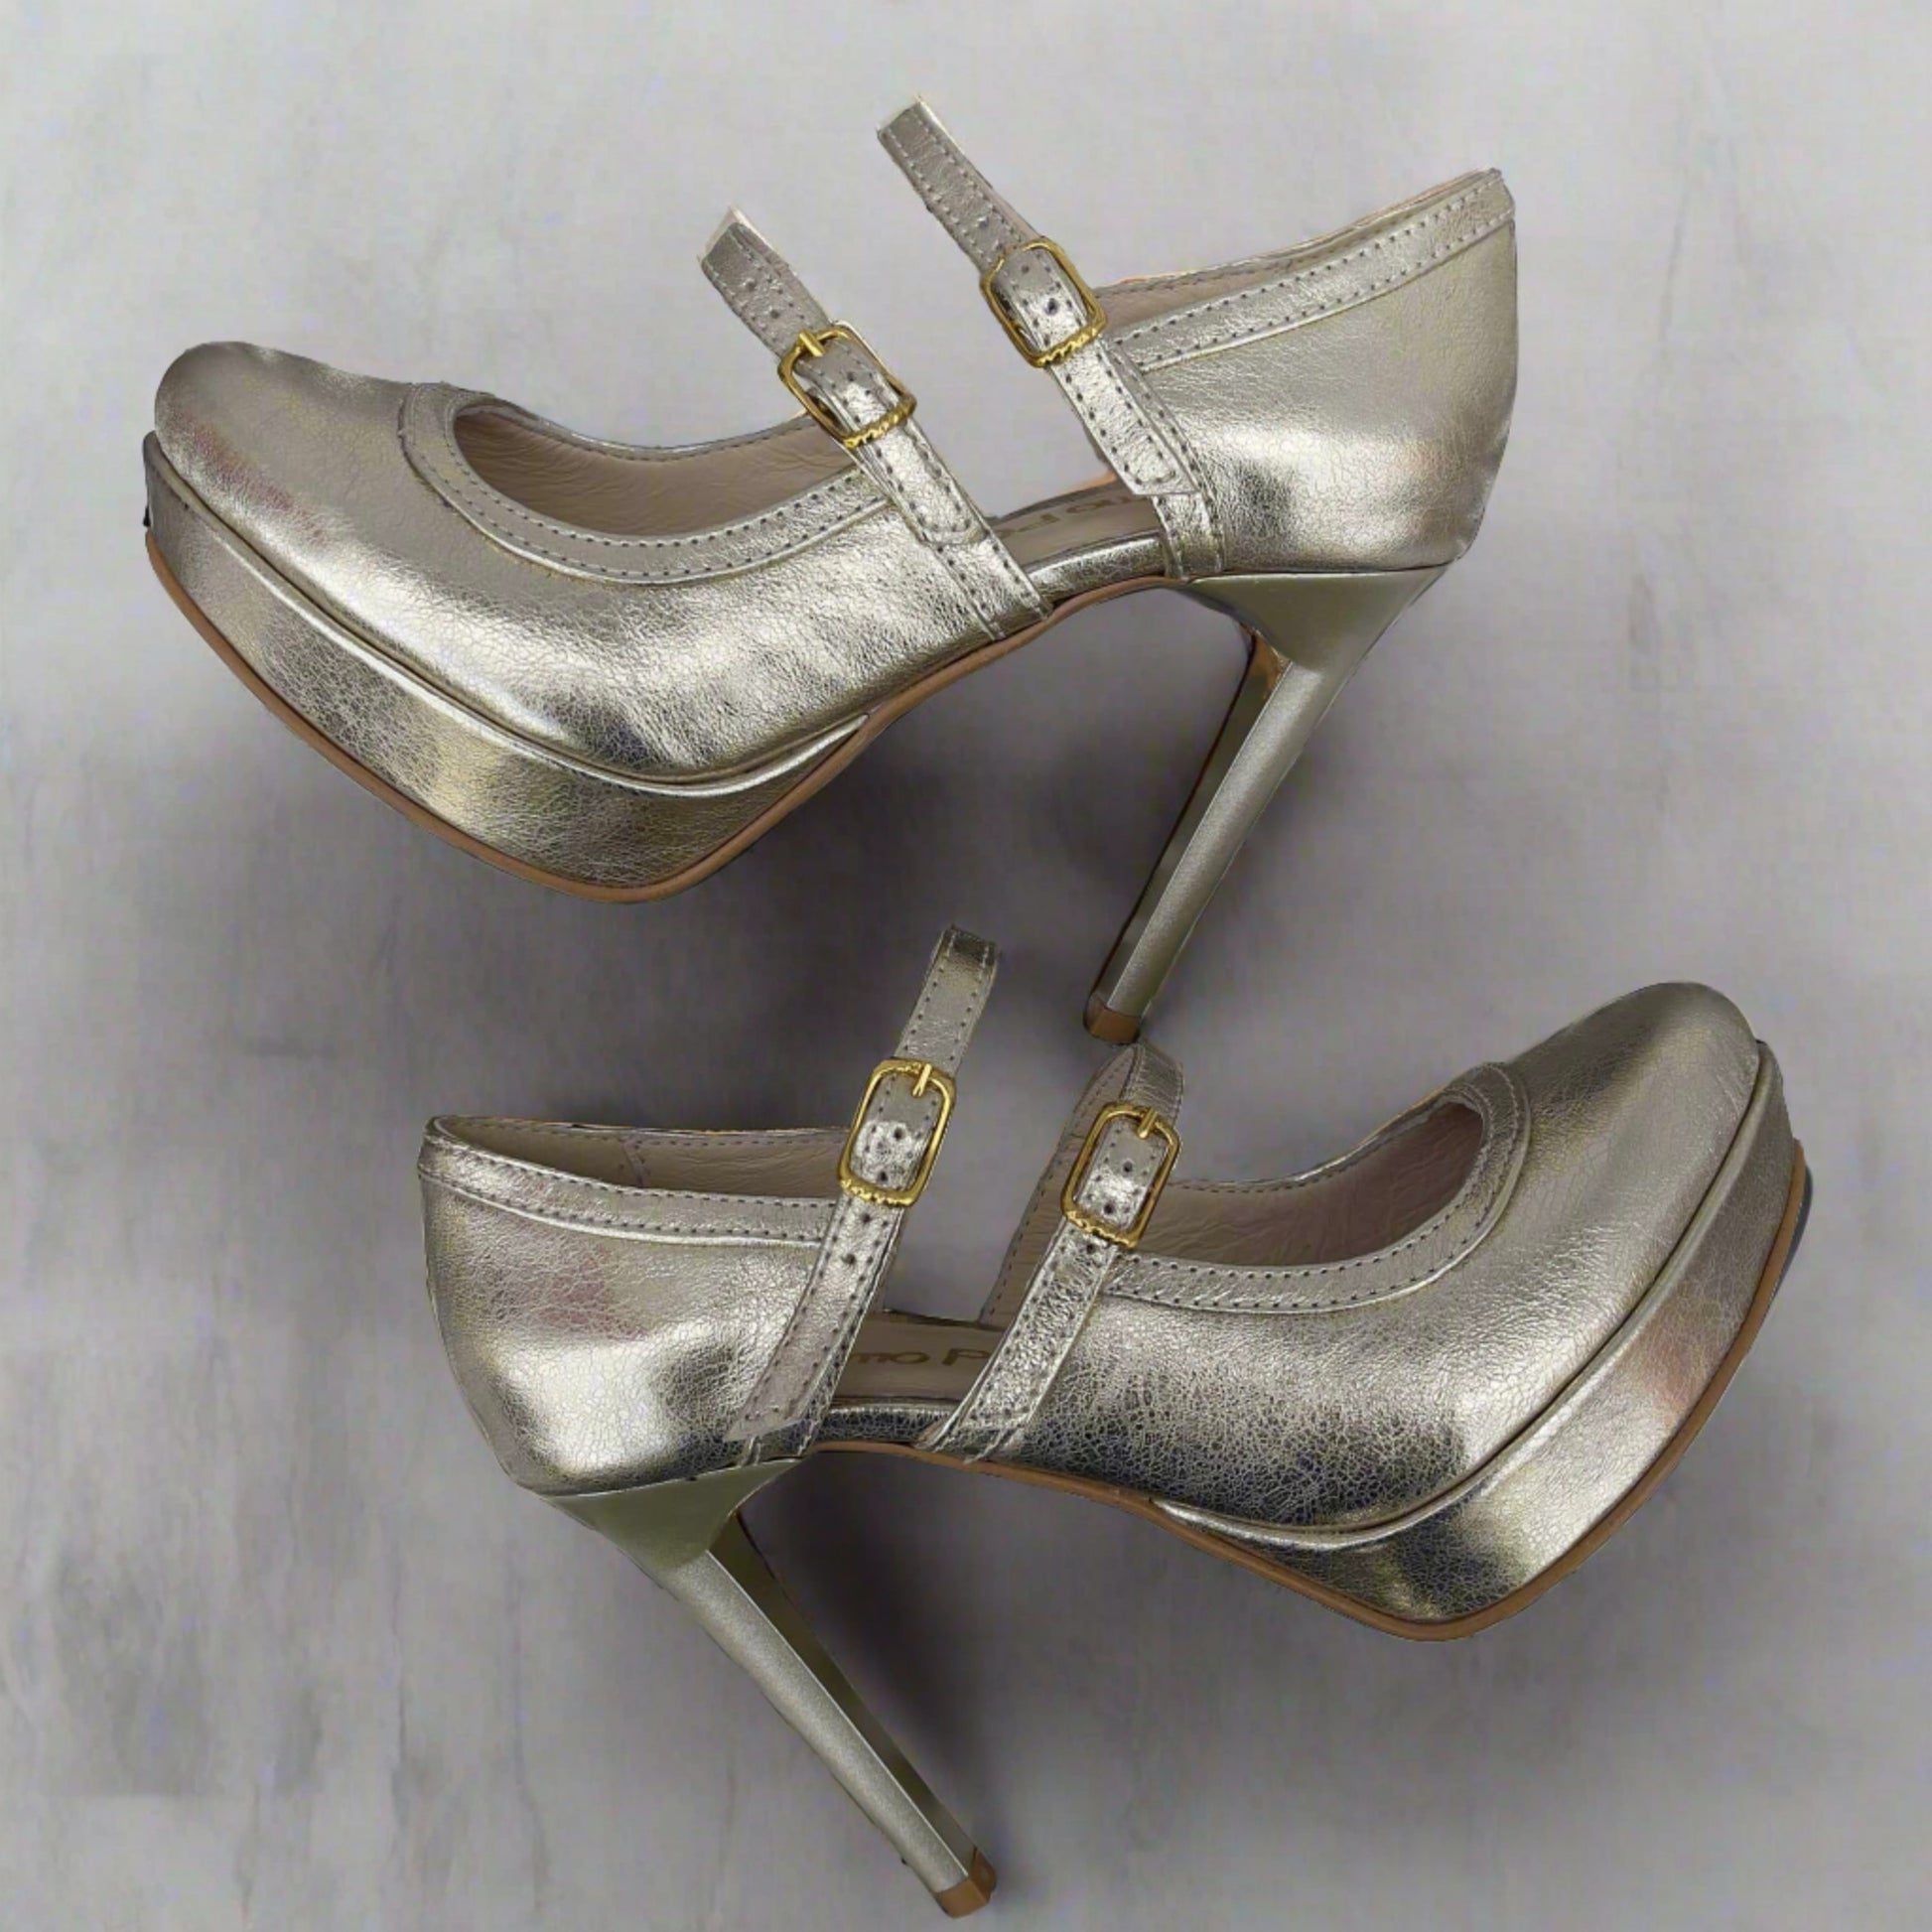 Small size platform sandals in gold leather, perfect for the wedding